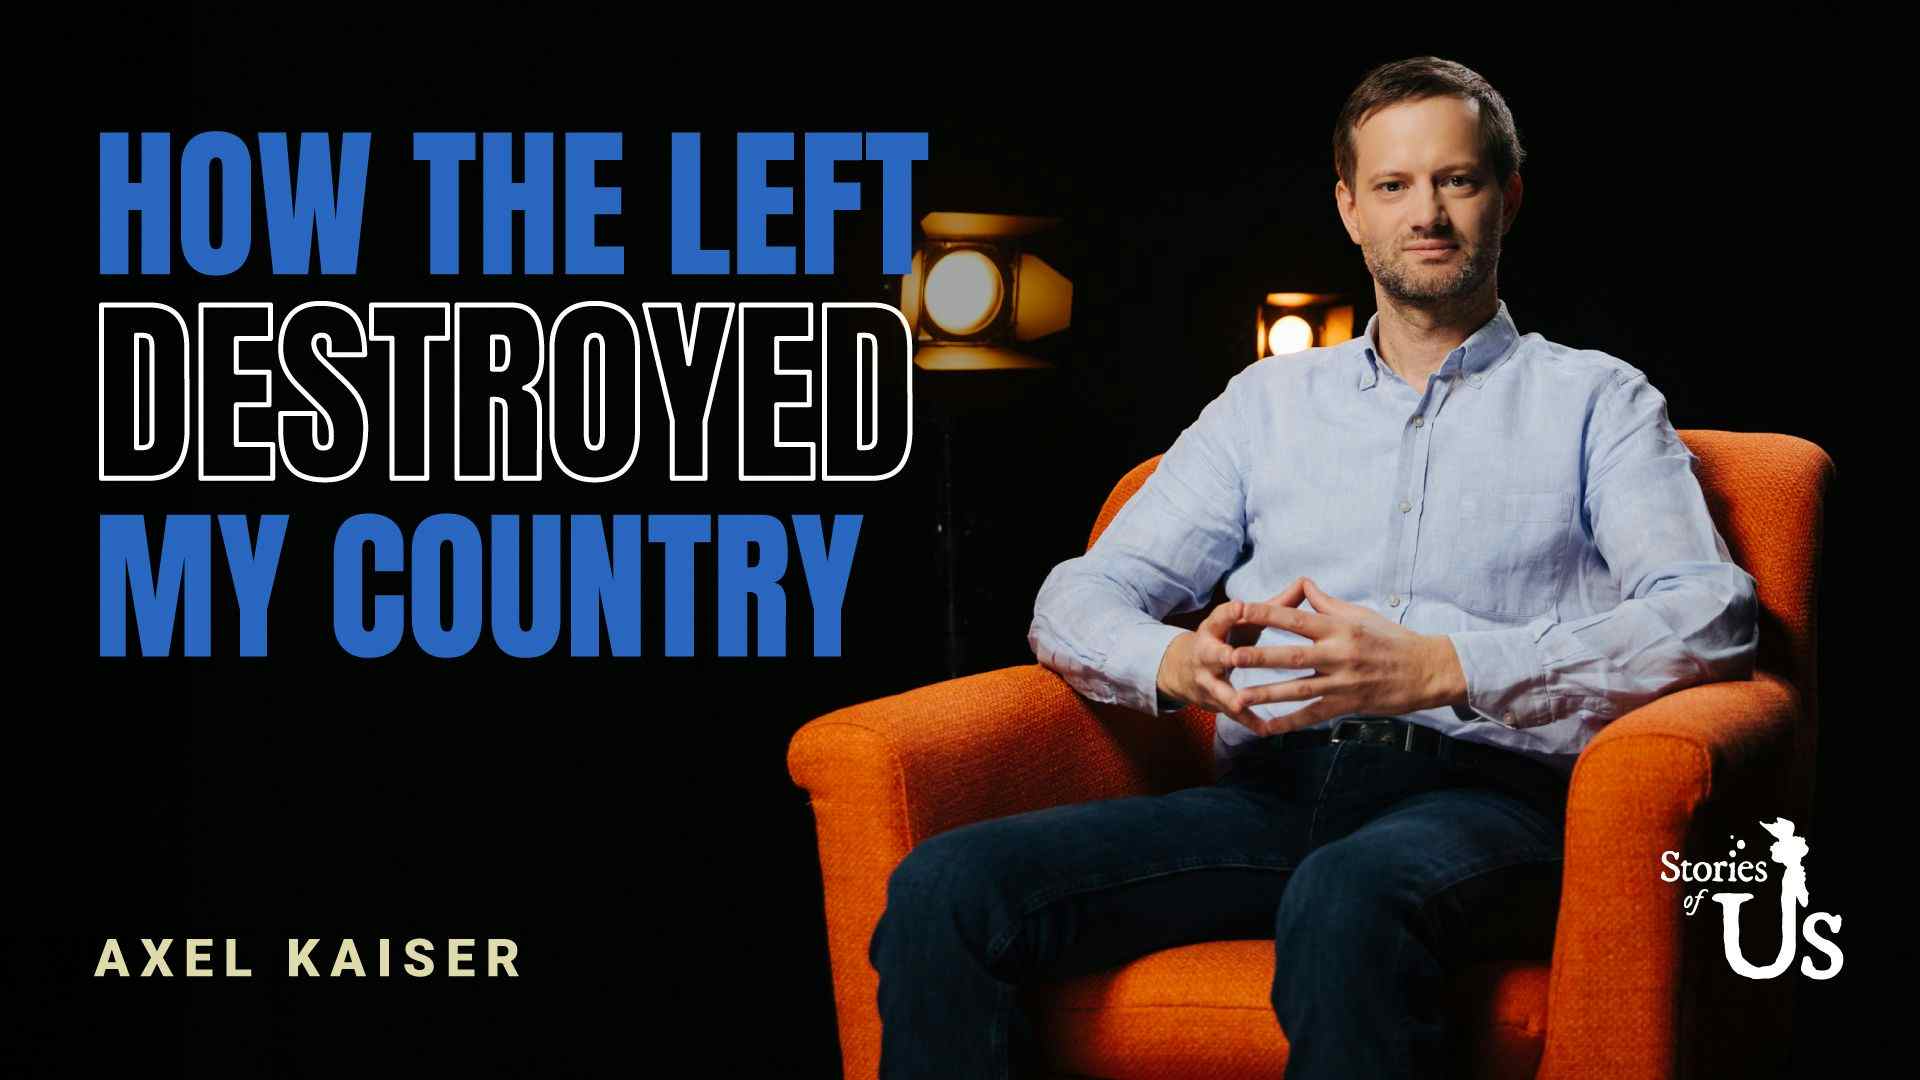 Axel Kaiser: How the Left Destroyed My Country